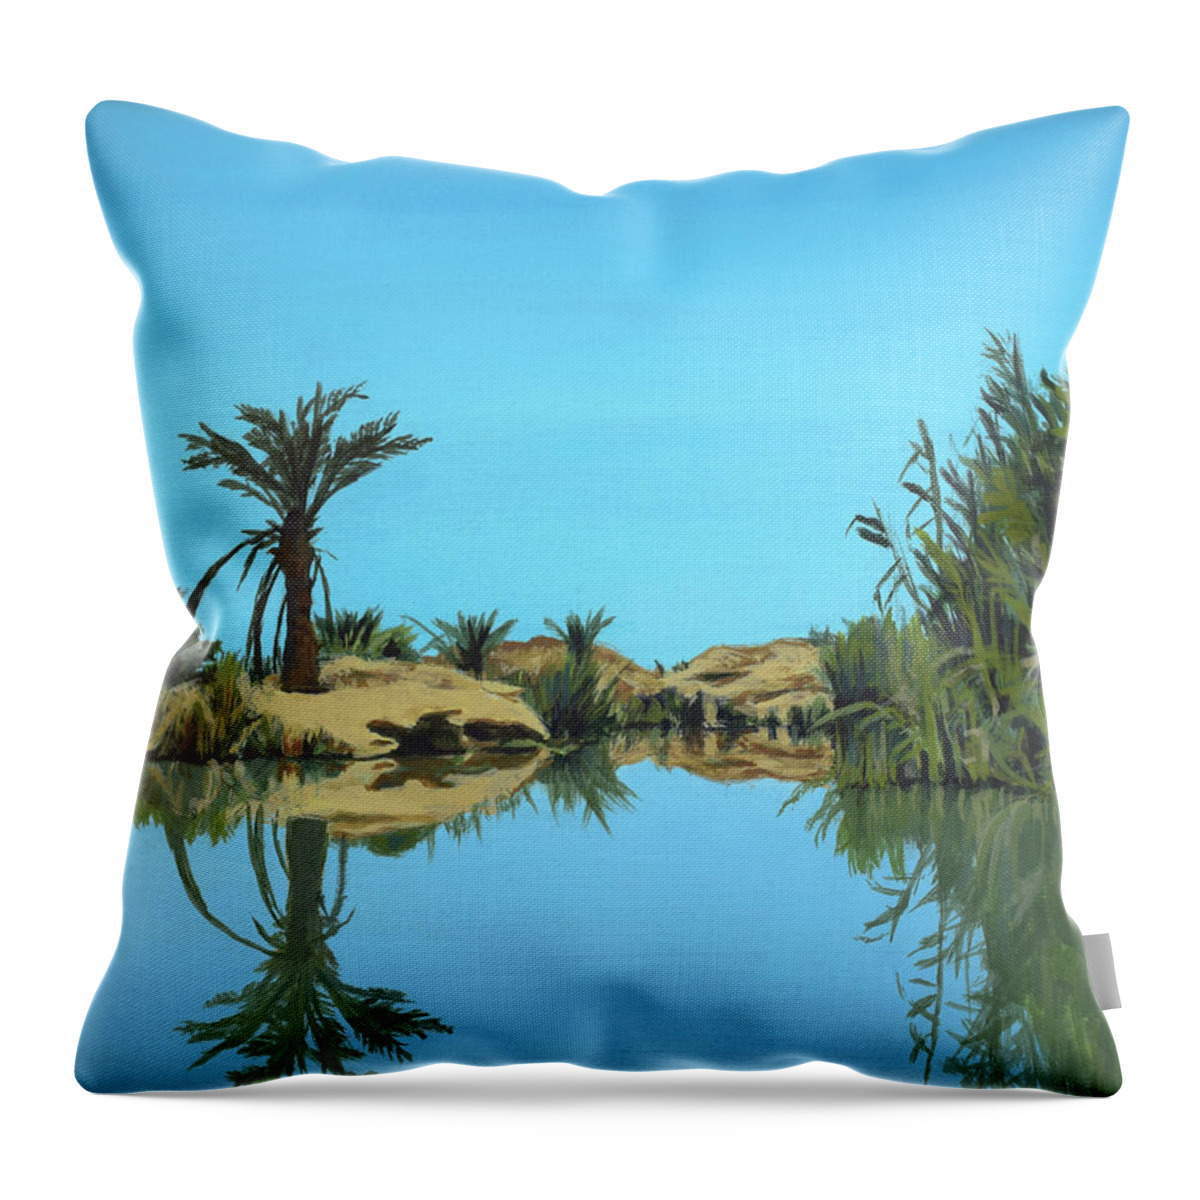  Throw Pillow featuring the painting Reflections by Sarra Elgammal